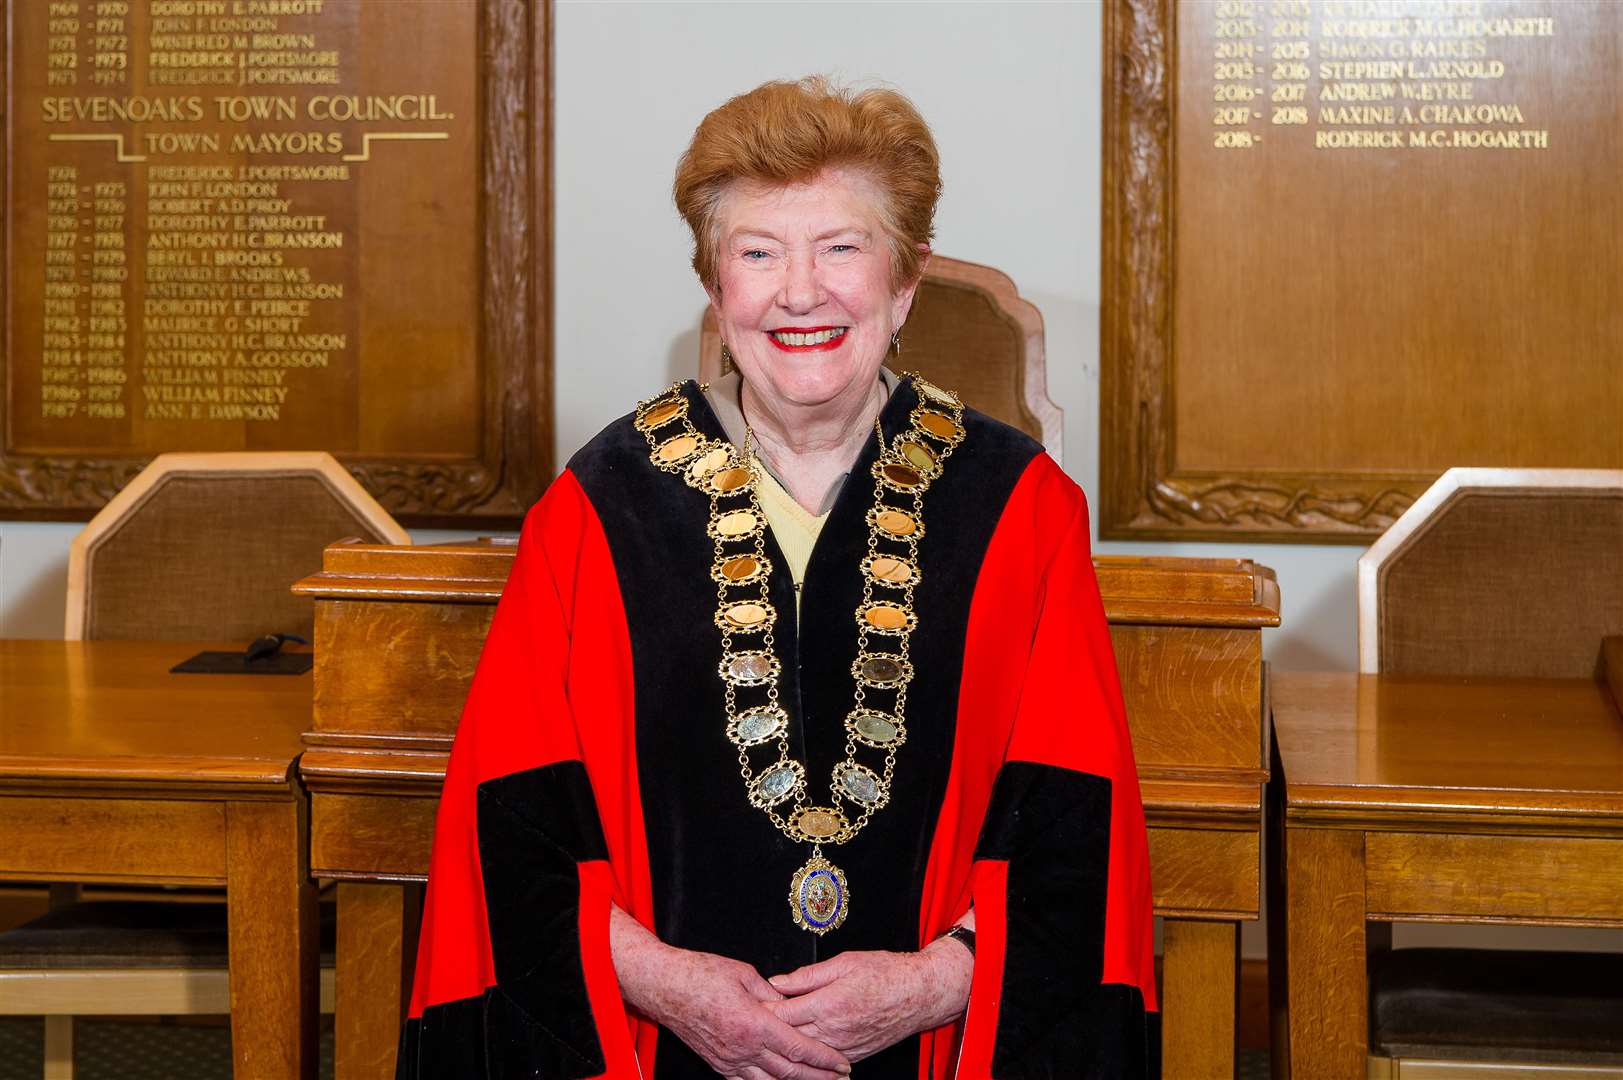 Cllr Dr Merilyn Canet has been elected to the post of Deputy Mayor